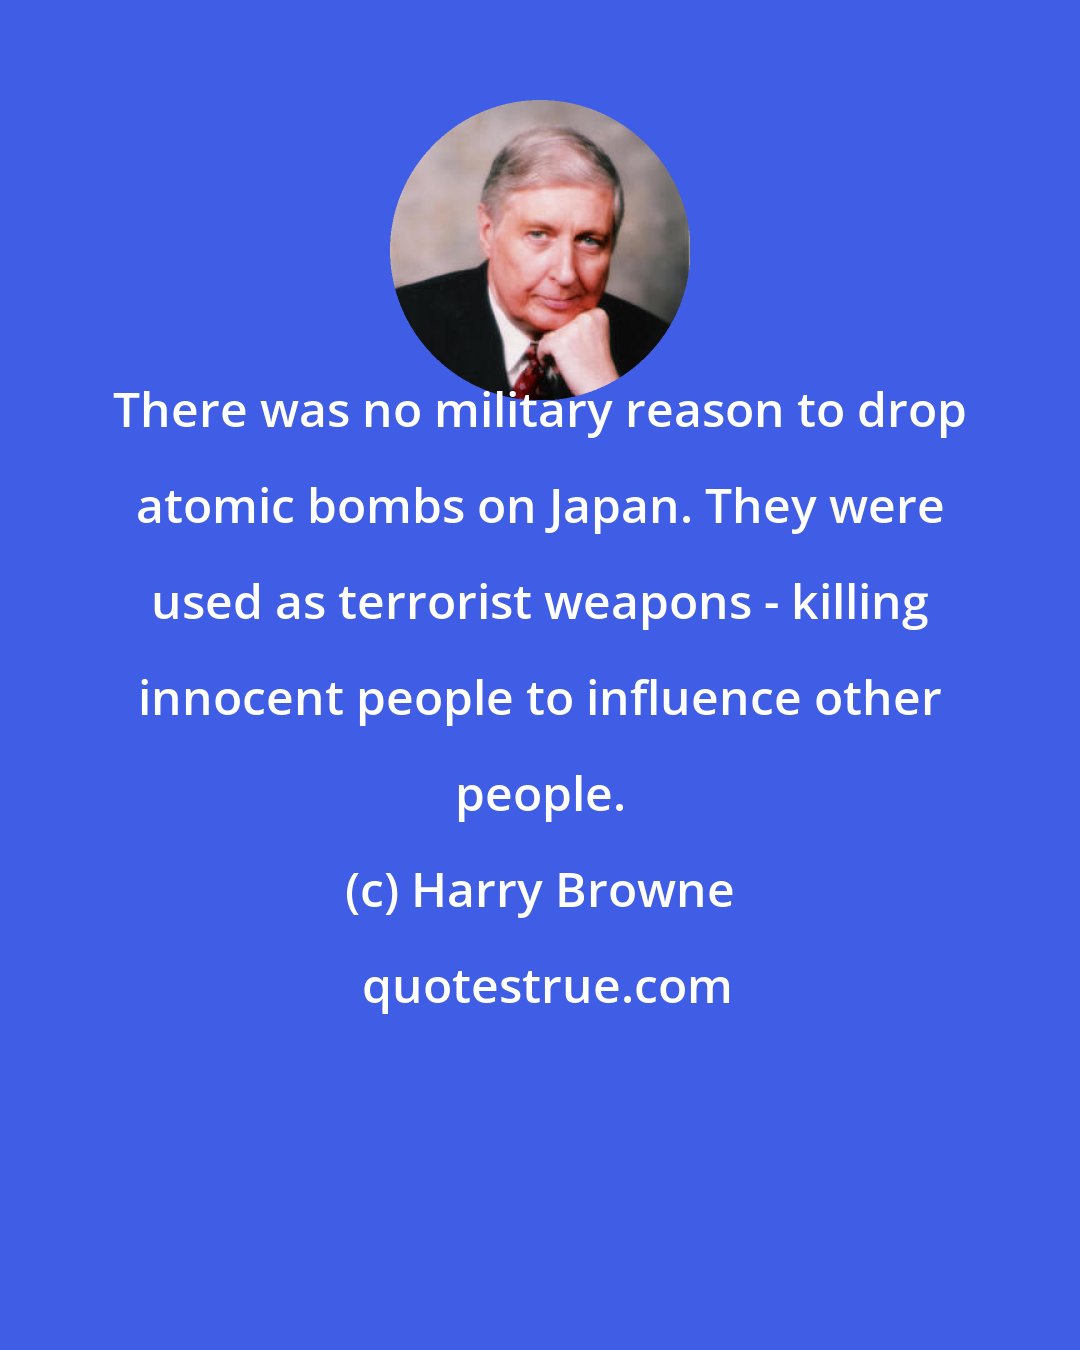 Harry Browne: There was no military reason to drop atomic bombs on Japan. They were used as terrorist weapons - killing innocent people to influence other people.